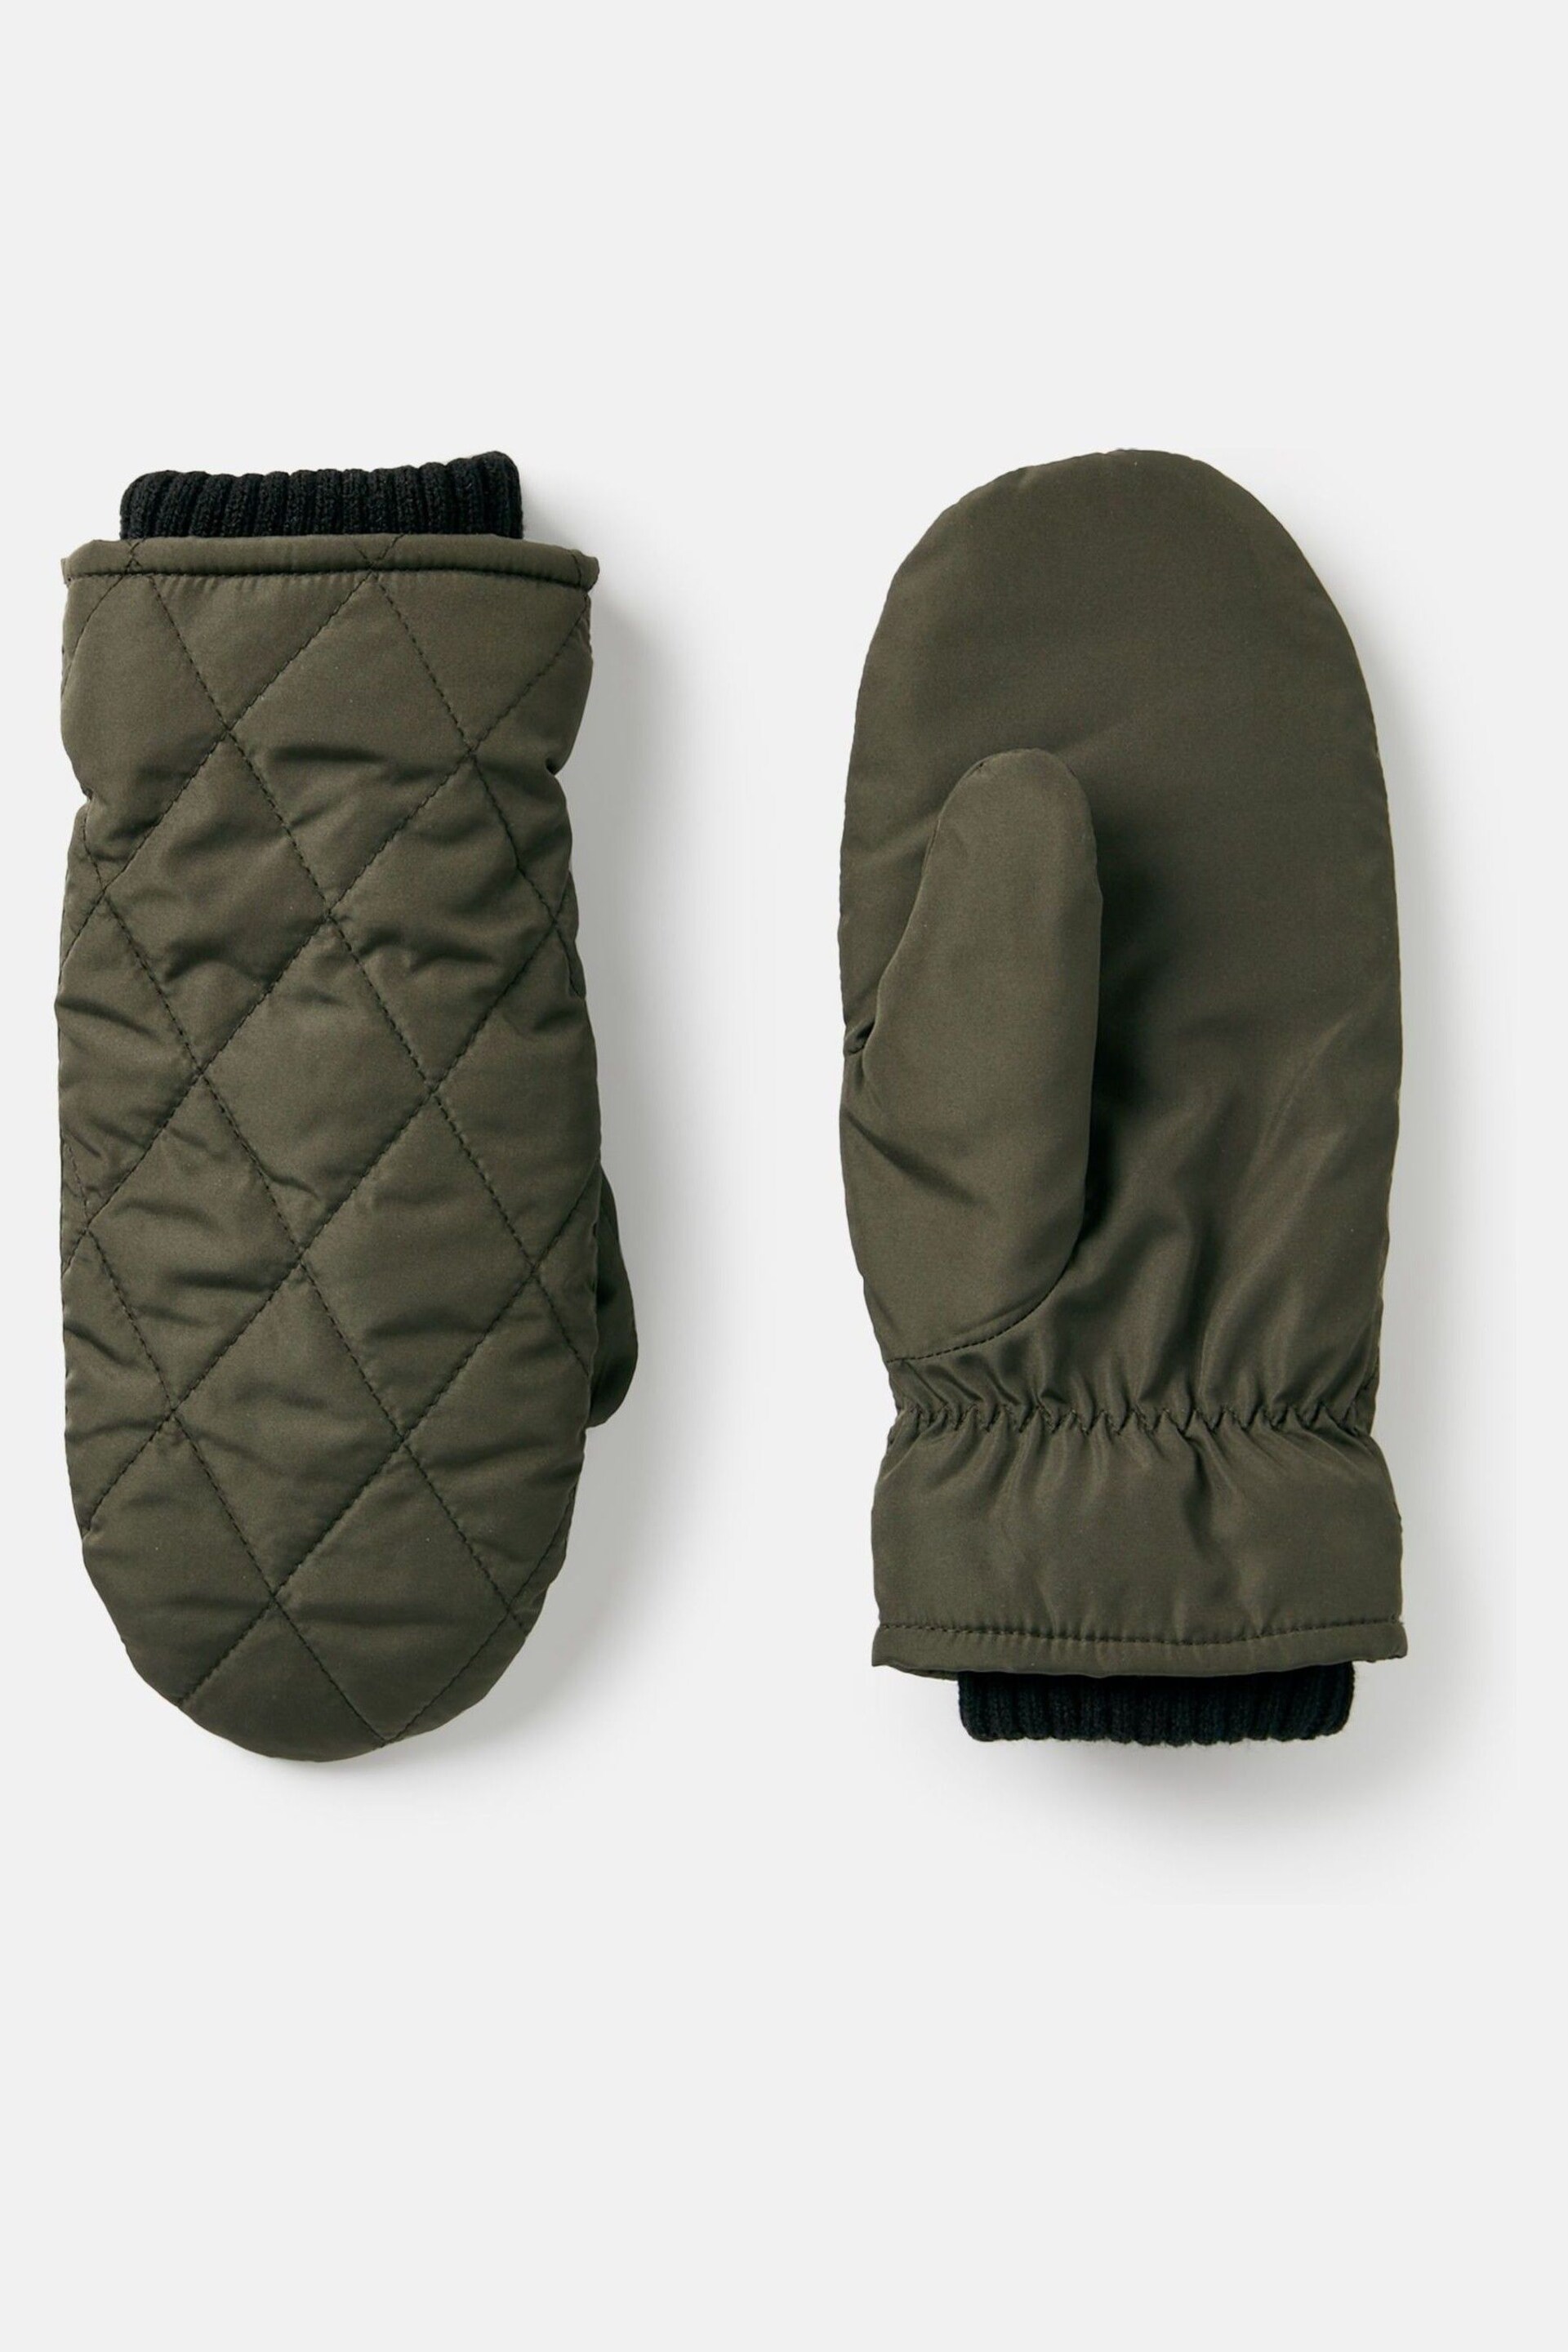 Joules Martha Khaki Green Quilted Mittens - Image 4 of 5